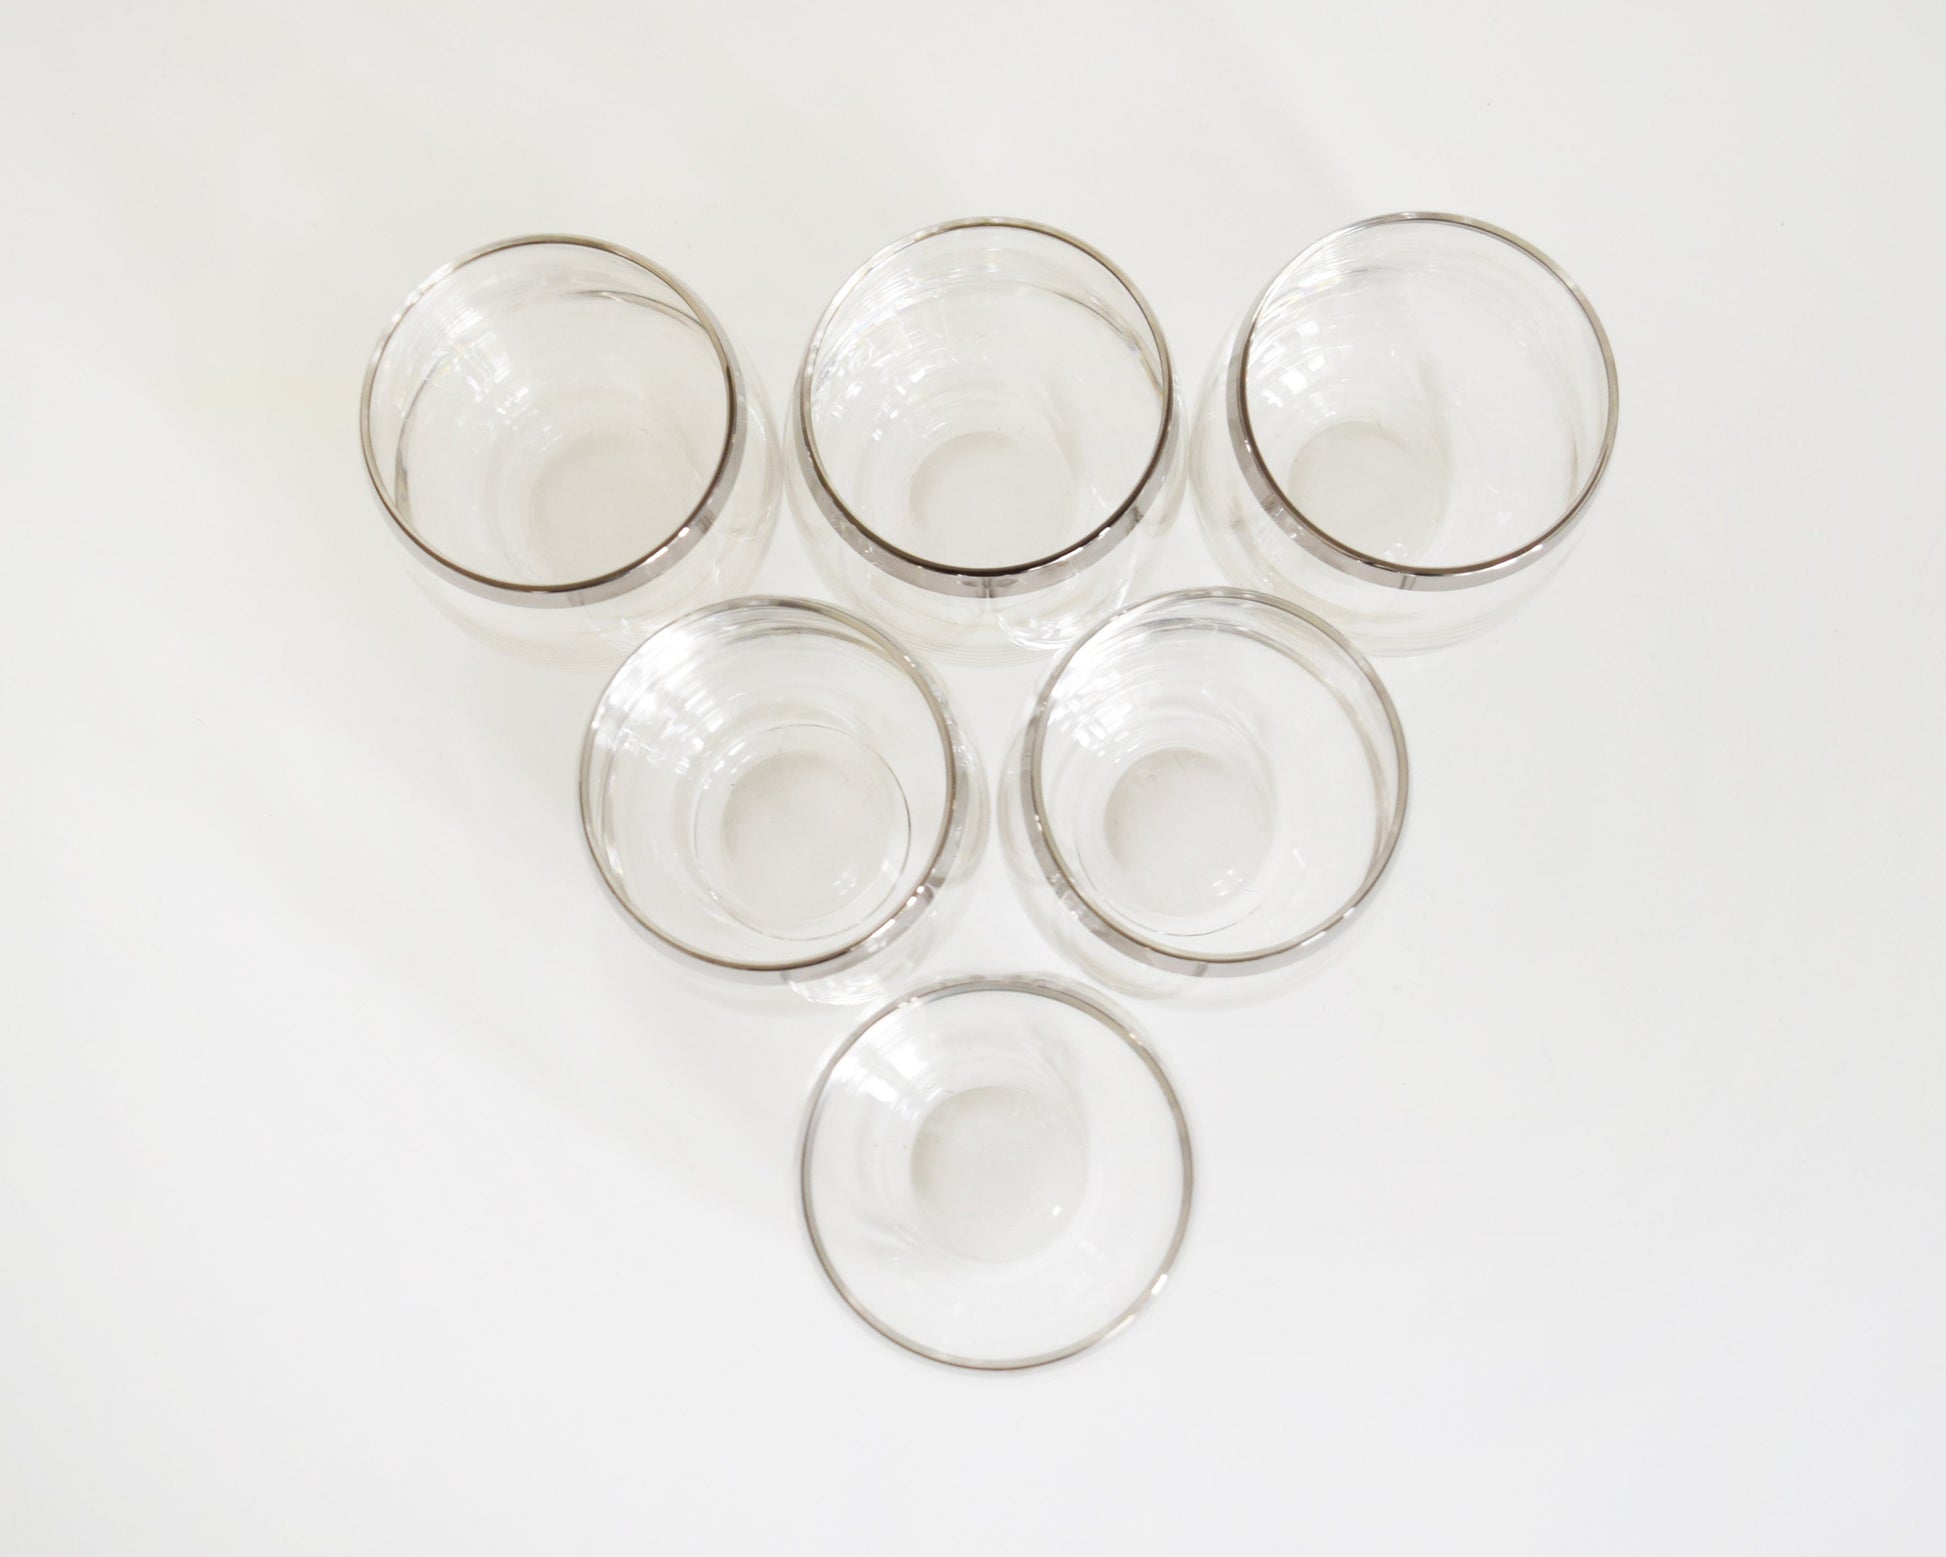 Overhead shot of a set of 6 vintage 60s sliver rim tumblers that have an elongated roly poly shape